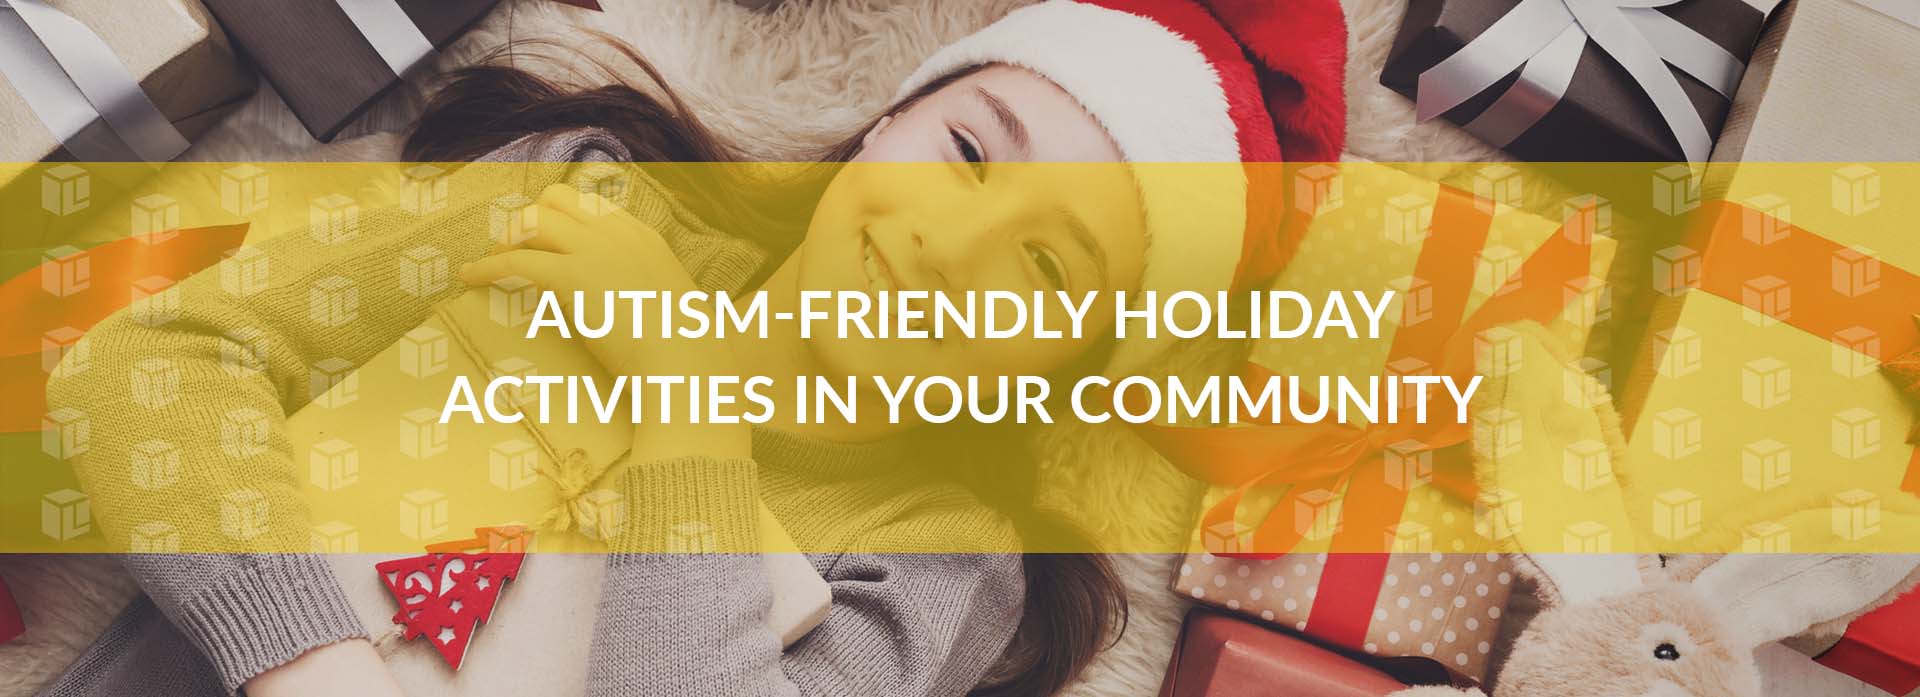 Autism-Friendly Holiday Activities In Your Community